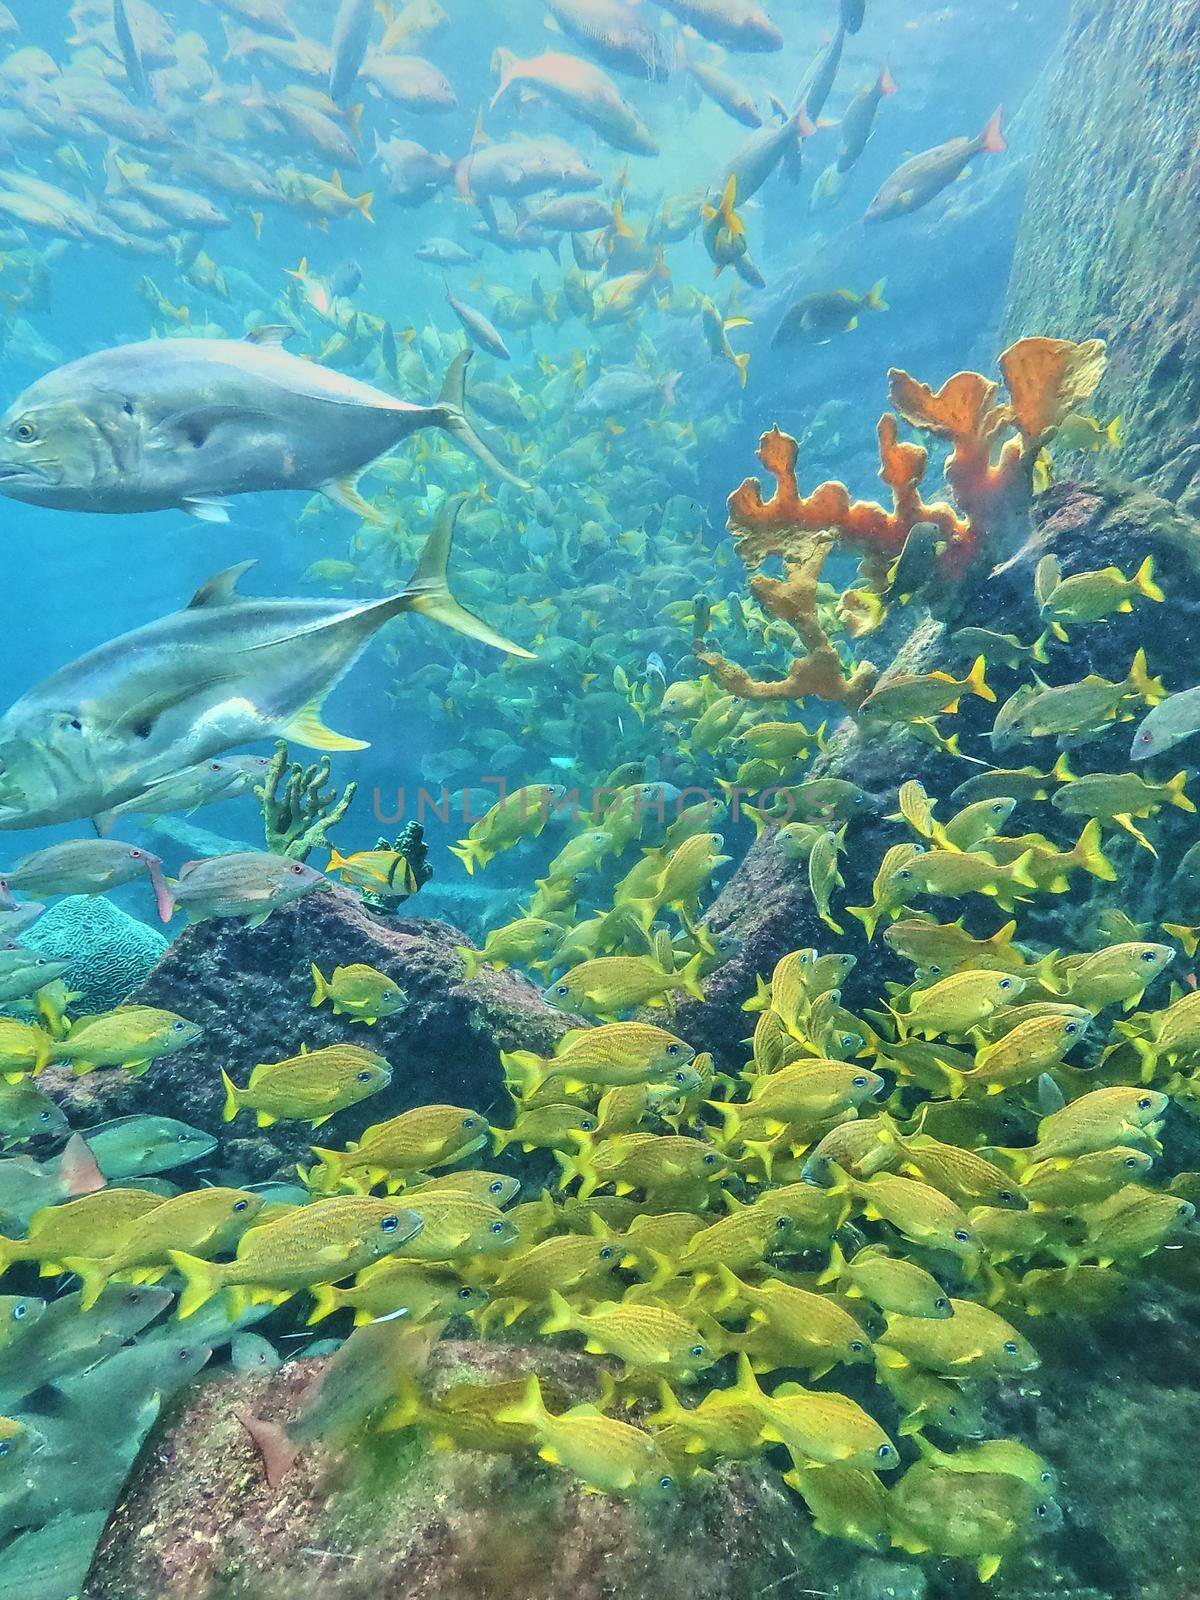 Group of yellow fish and coral in aquarium by njproductions